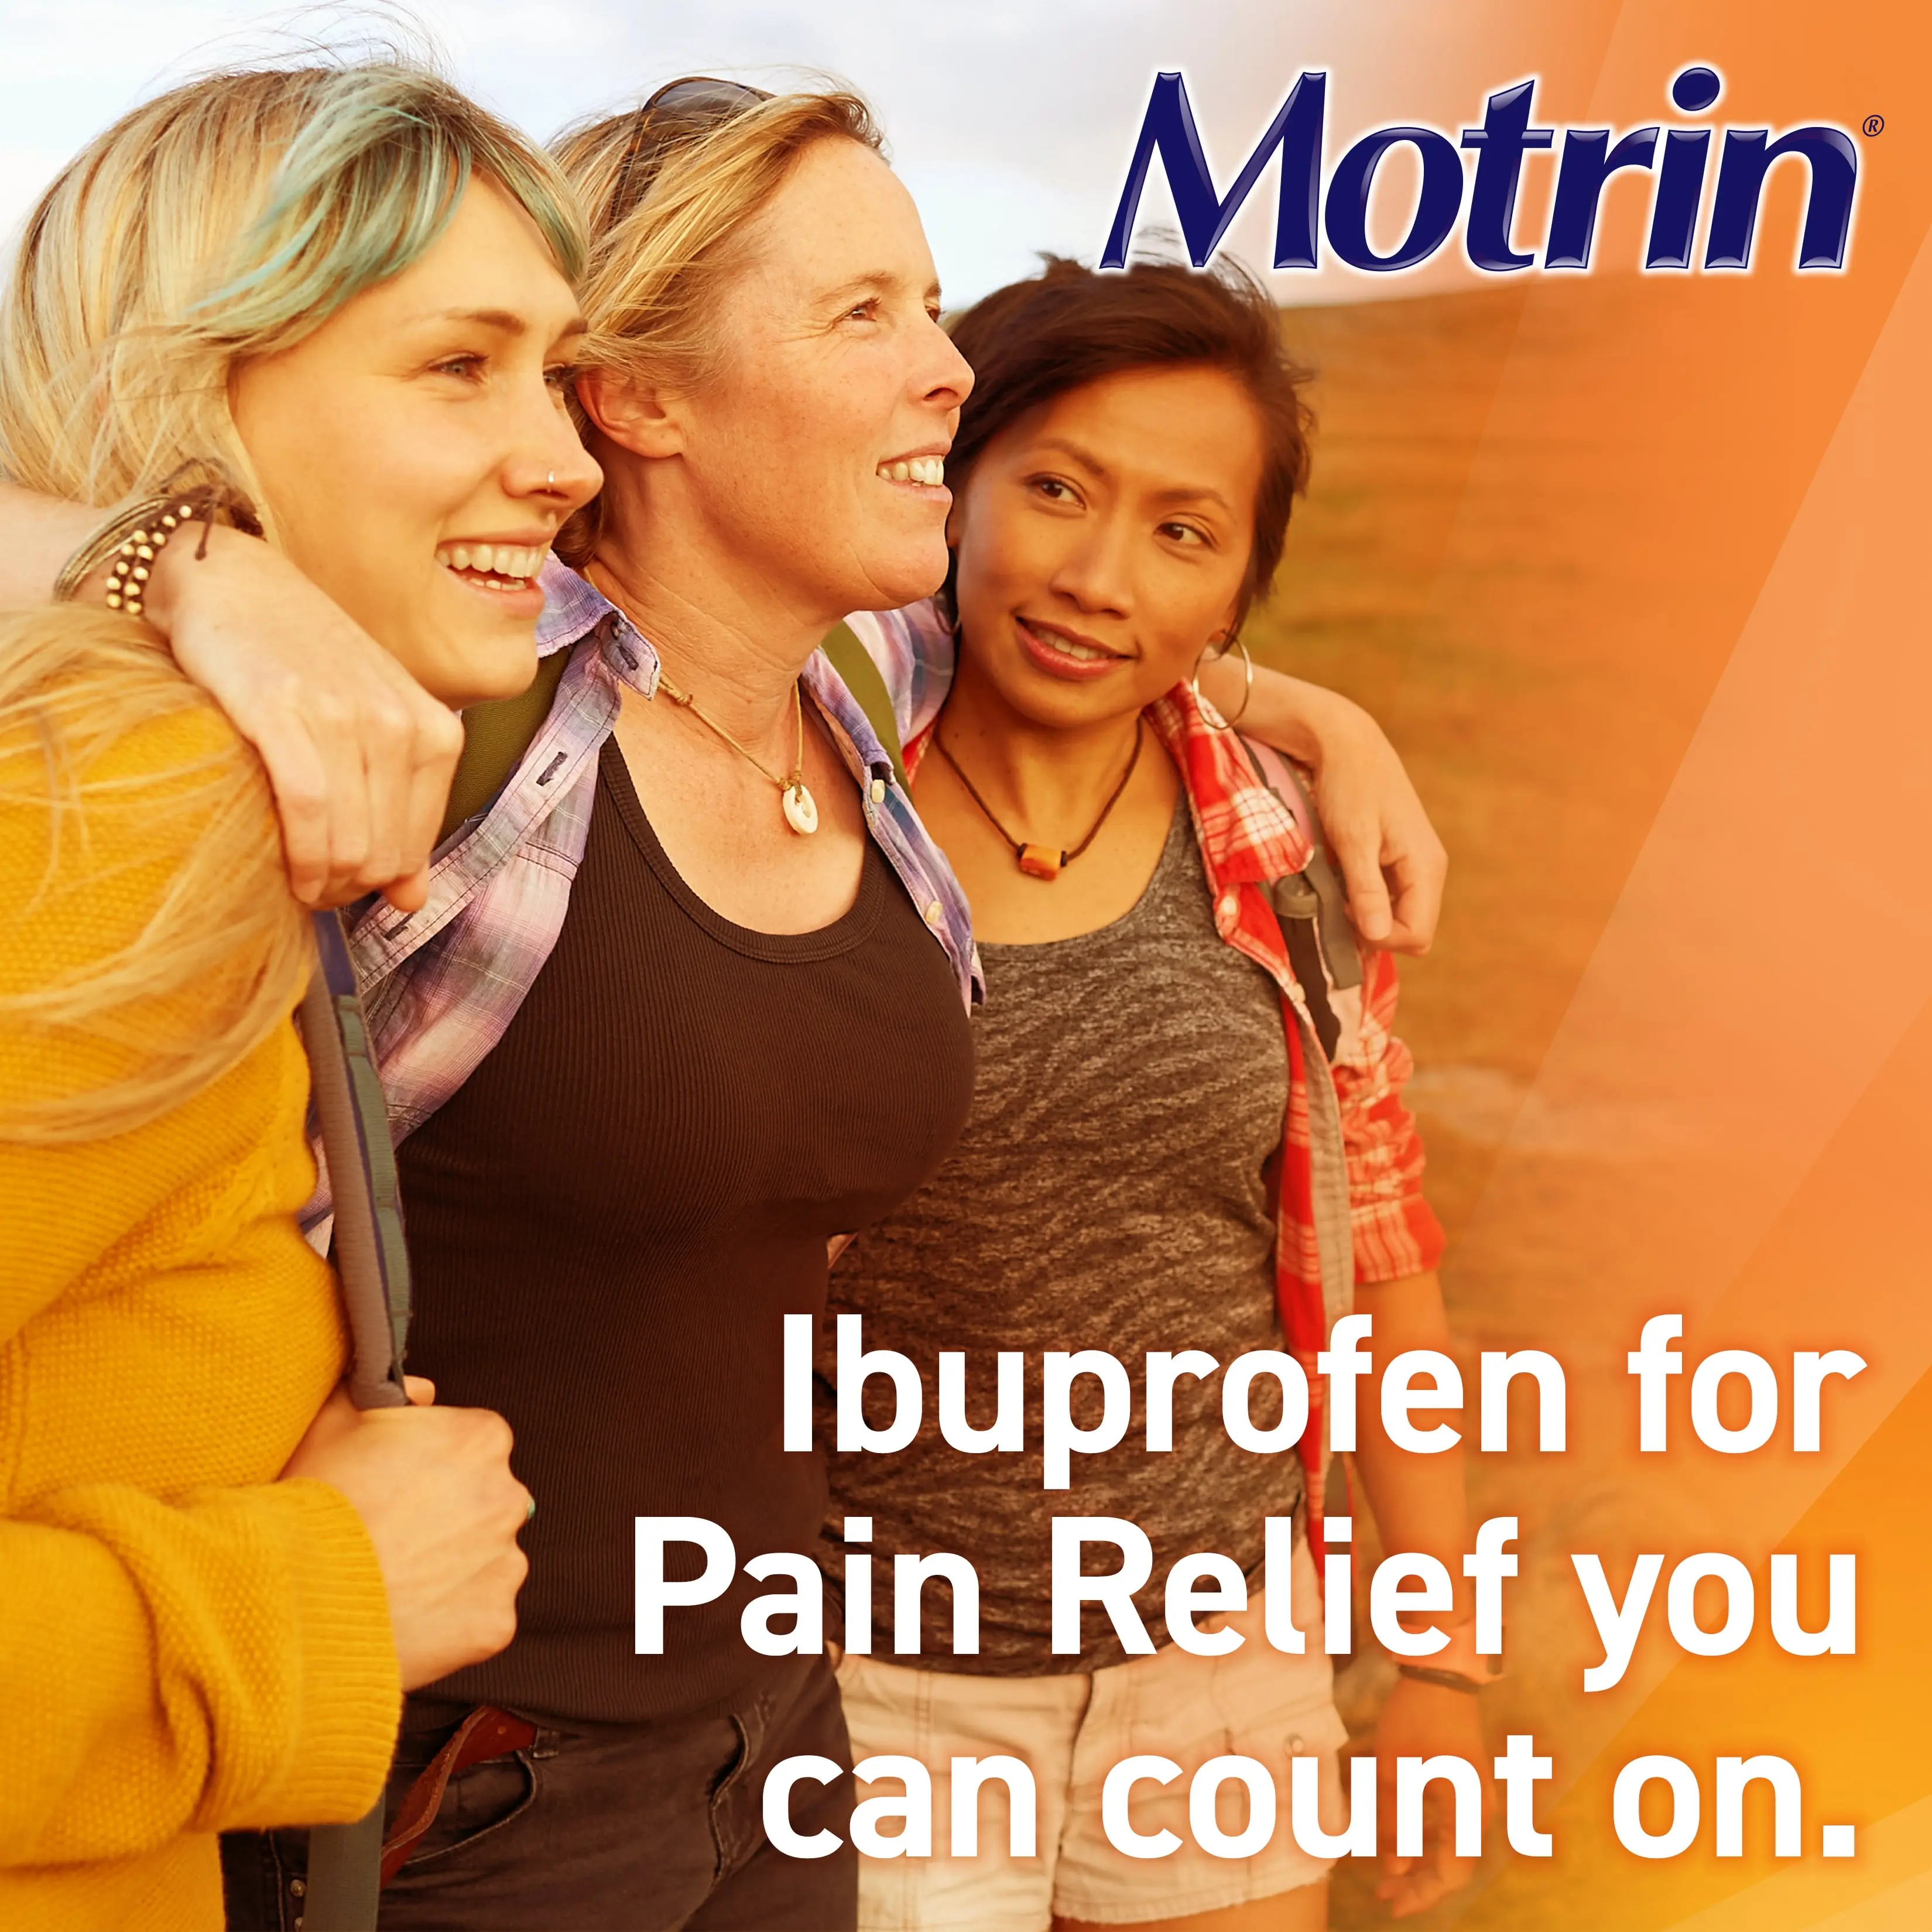 Motrin Ibuprofen pain relief you can count on